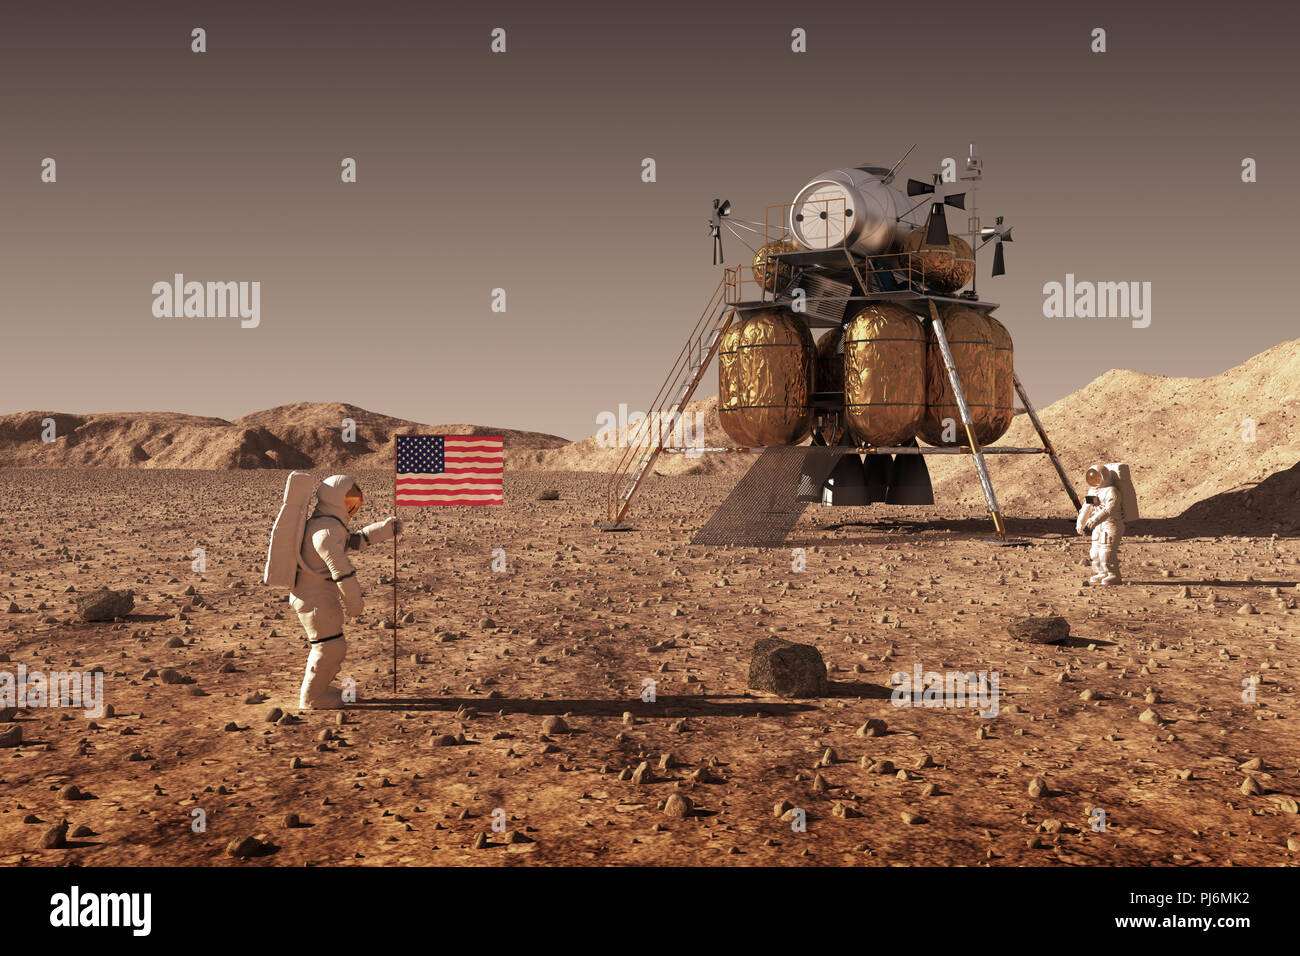 Astronauts Set An American Flag On The Planet Mars. 3D Illustration. Stock Photo